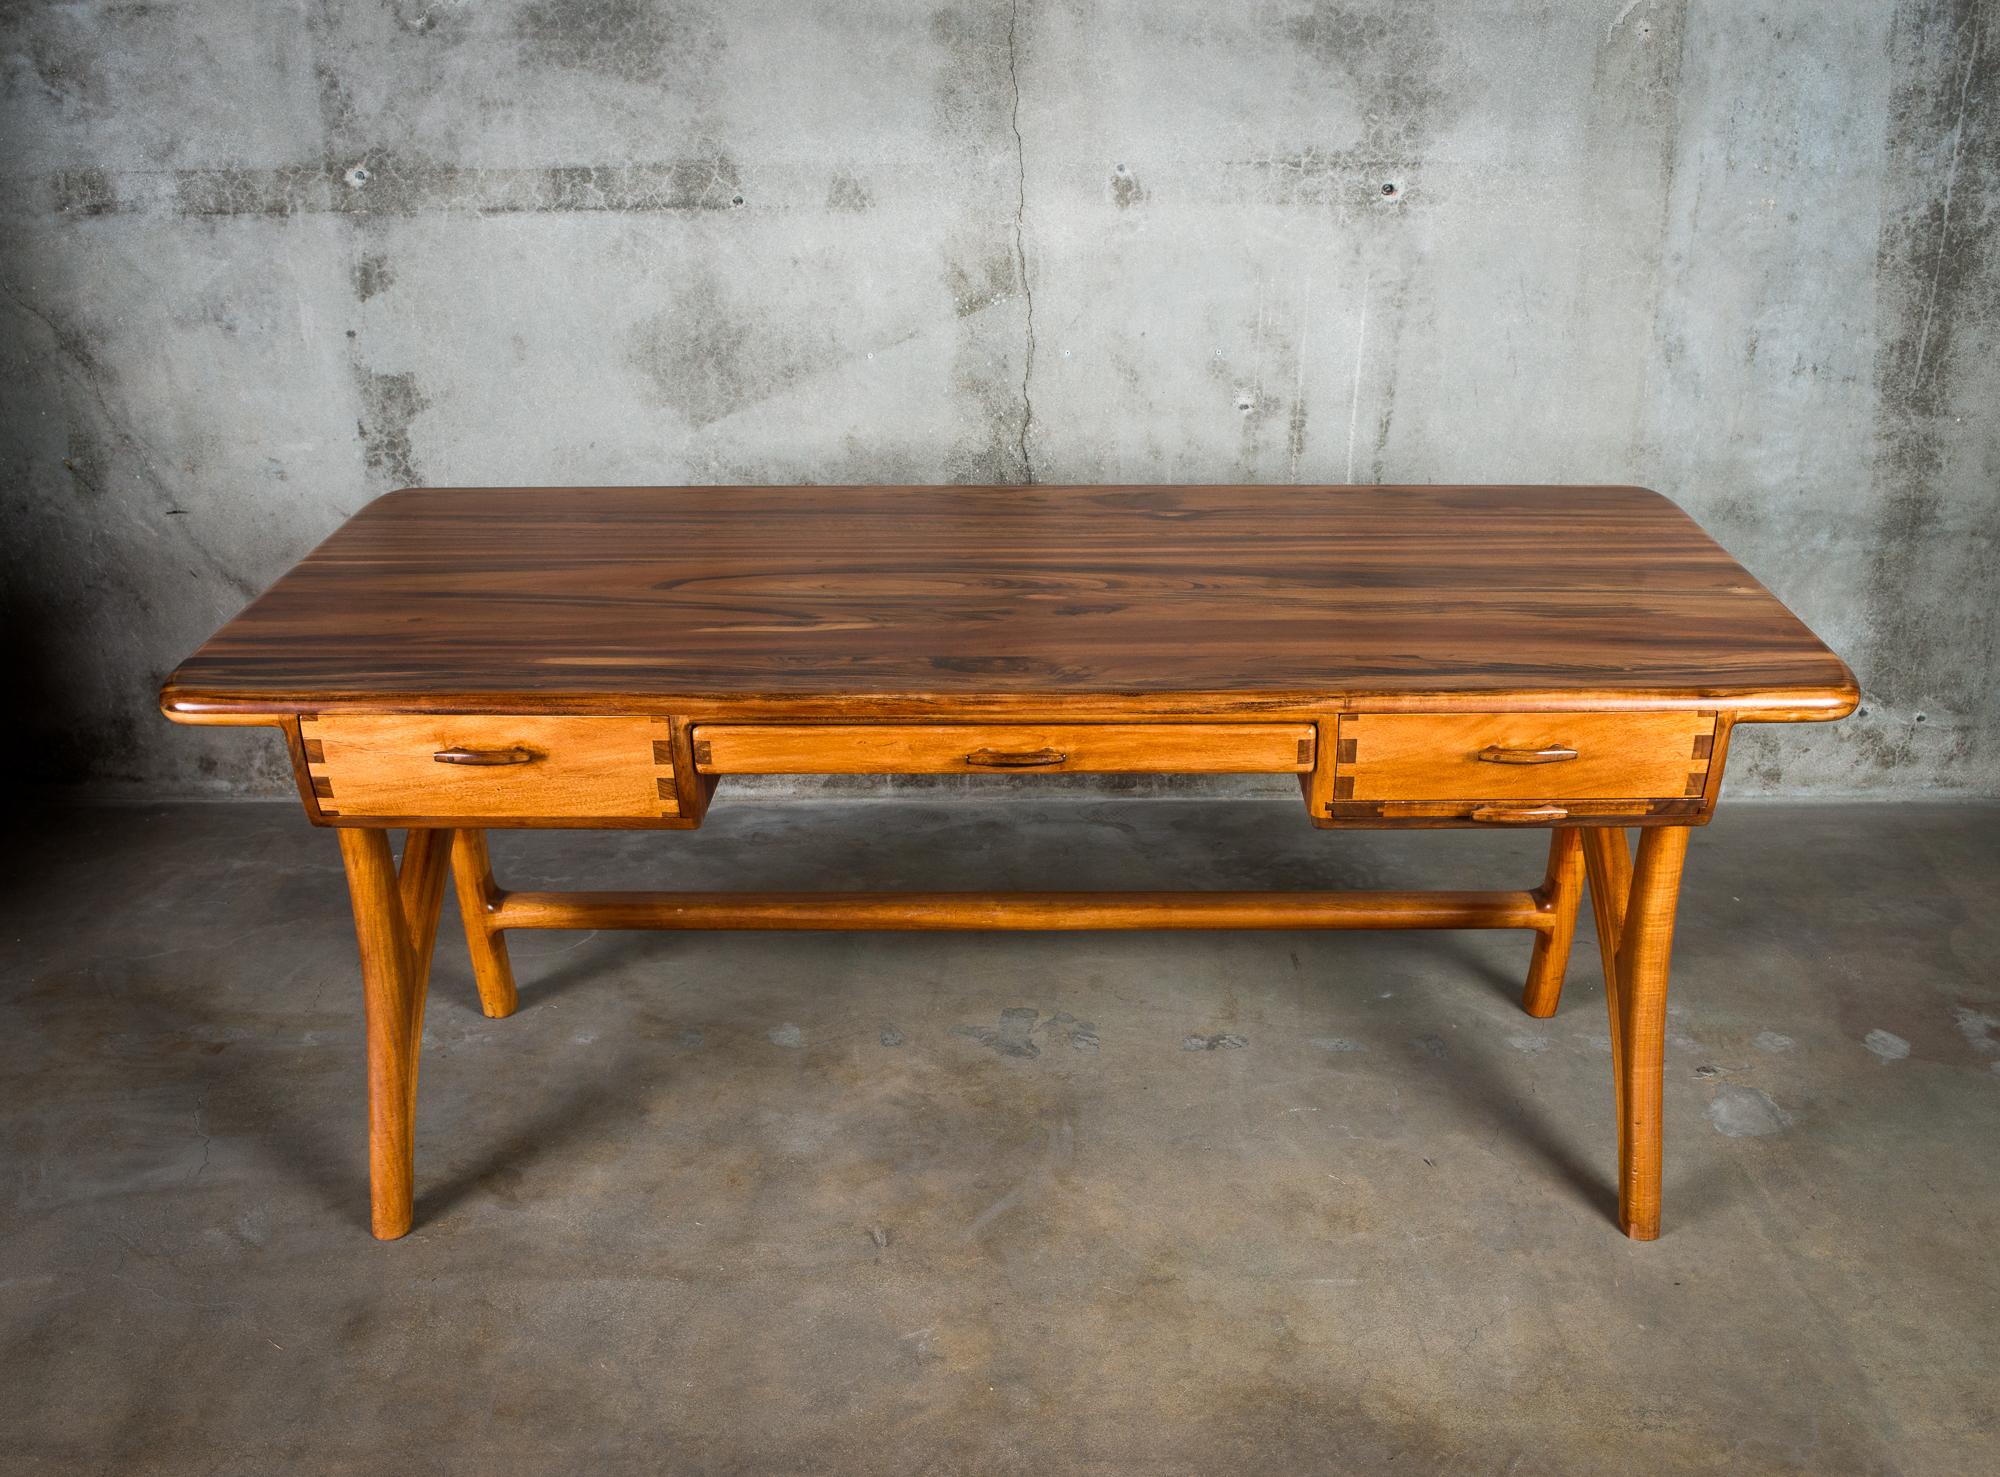 One desk by James Sweeney in rosewood.